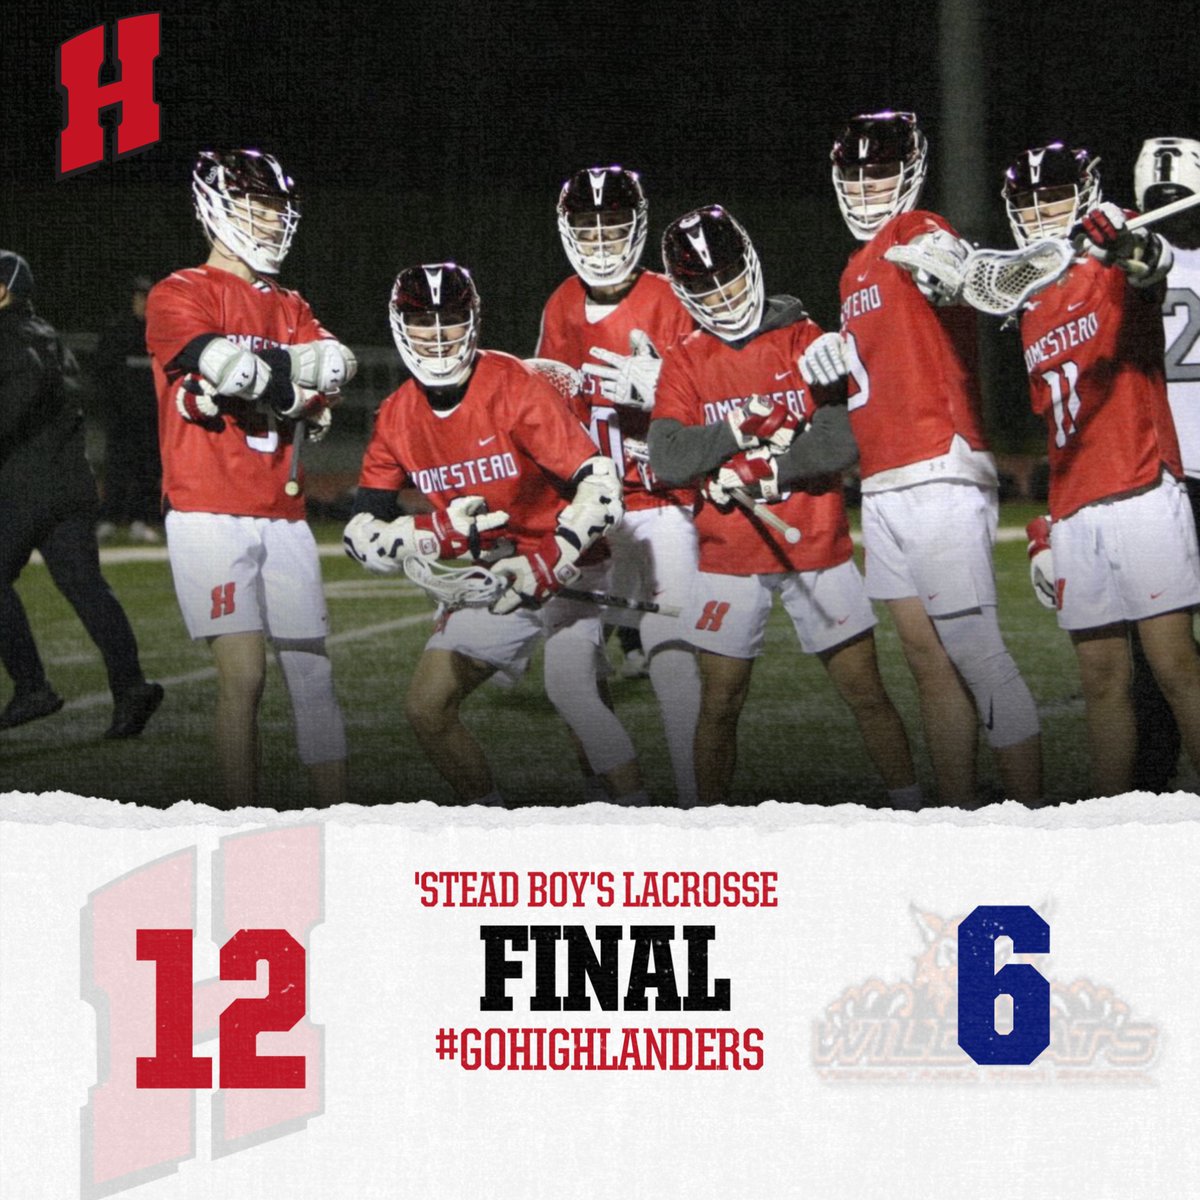 From Highlander Stadium...Homestead 12 Verona 6 Senior Sean West with the hat trick! JV also wins a close one 2-1! Back at it tomorrow, home game vs Lakeshore. #Keepgrinding #SteadLax